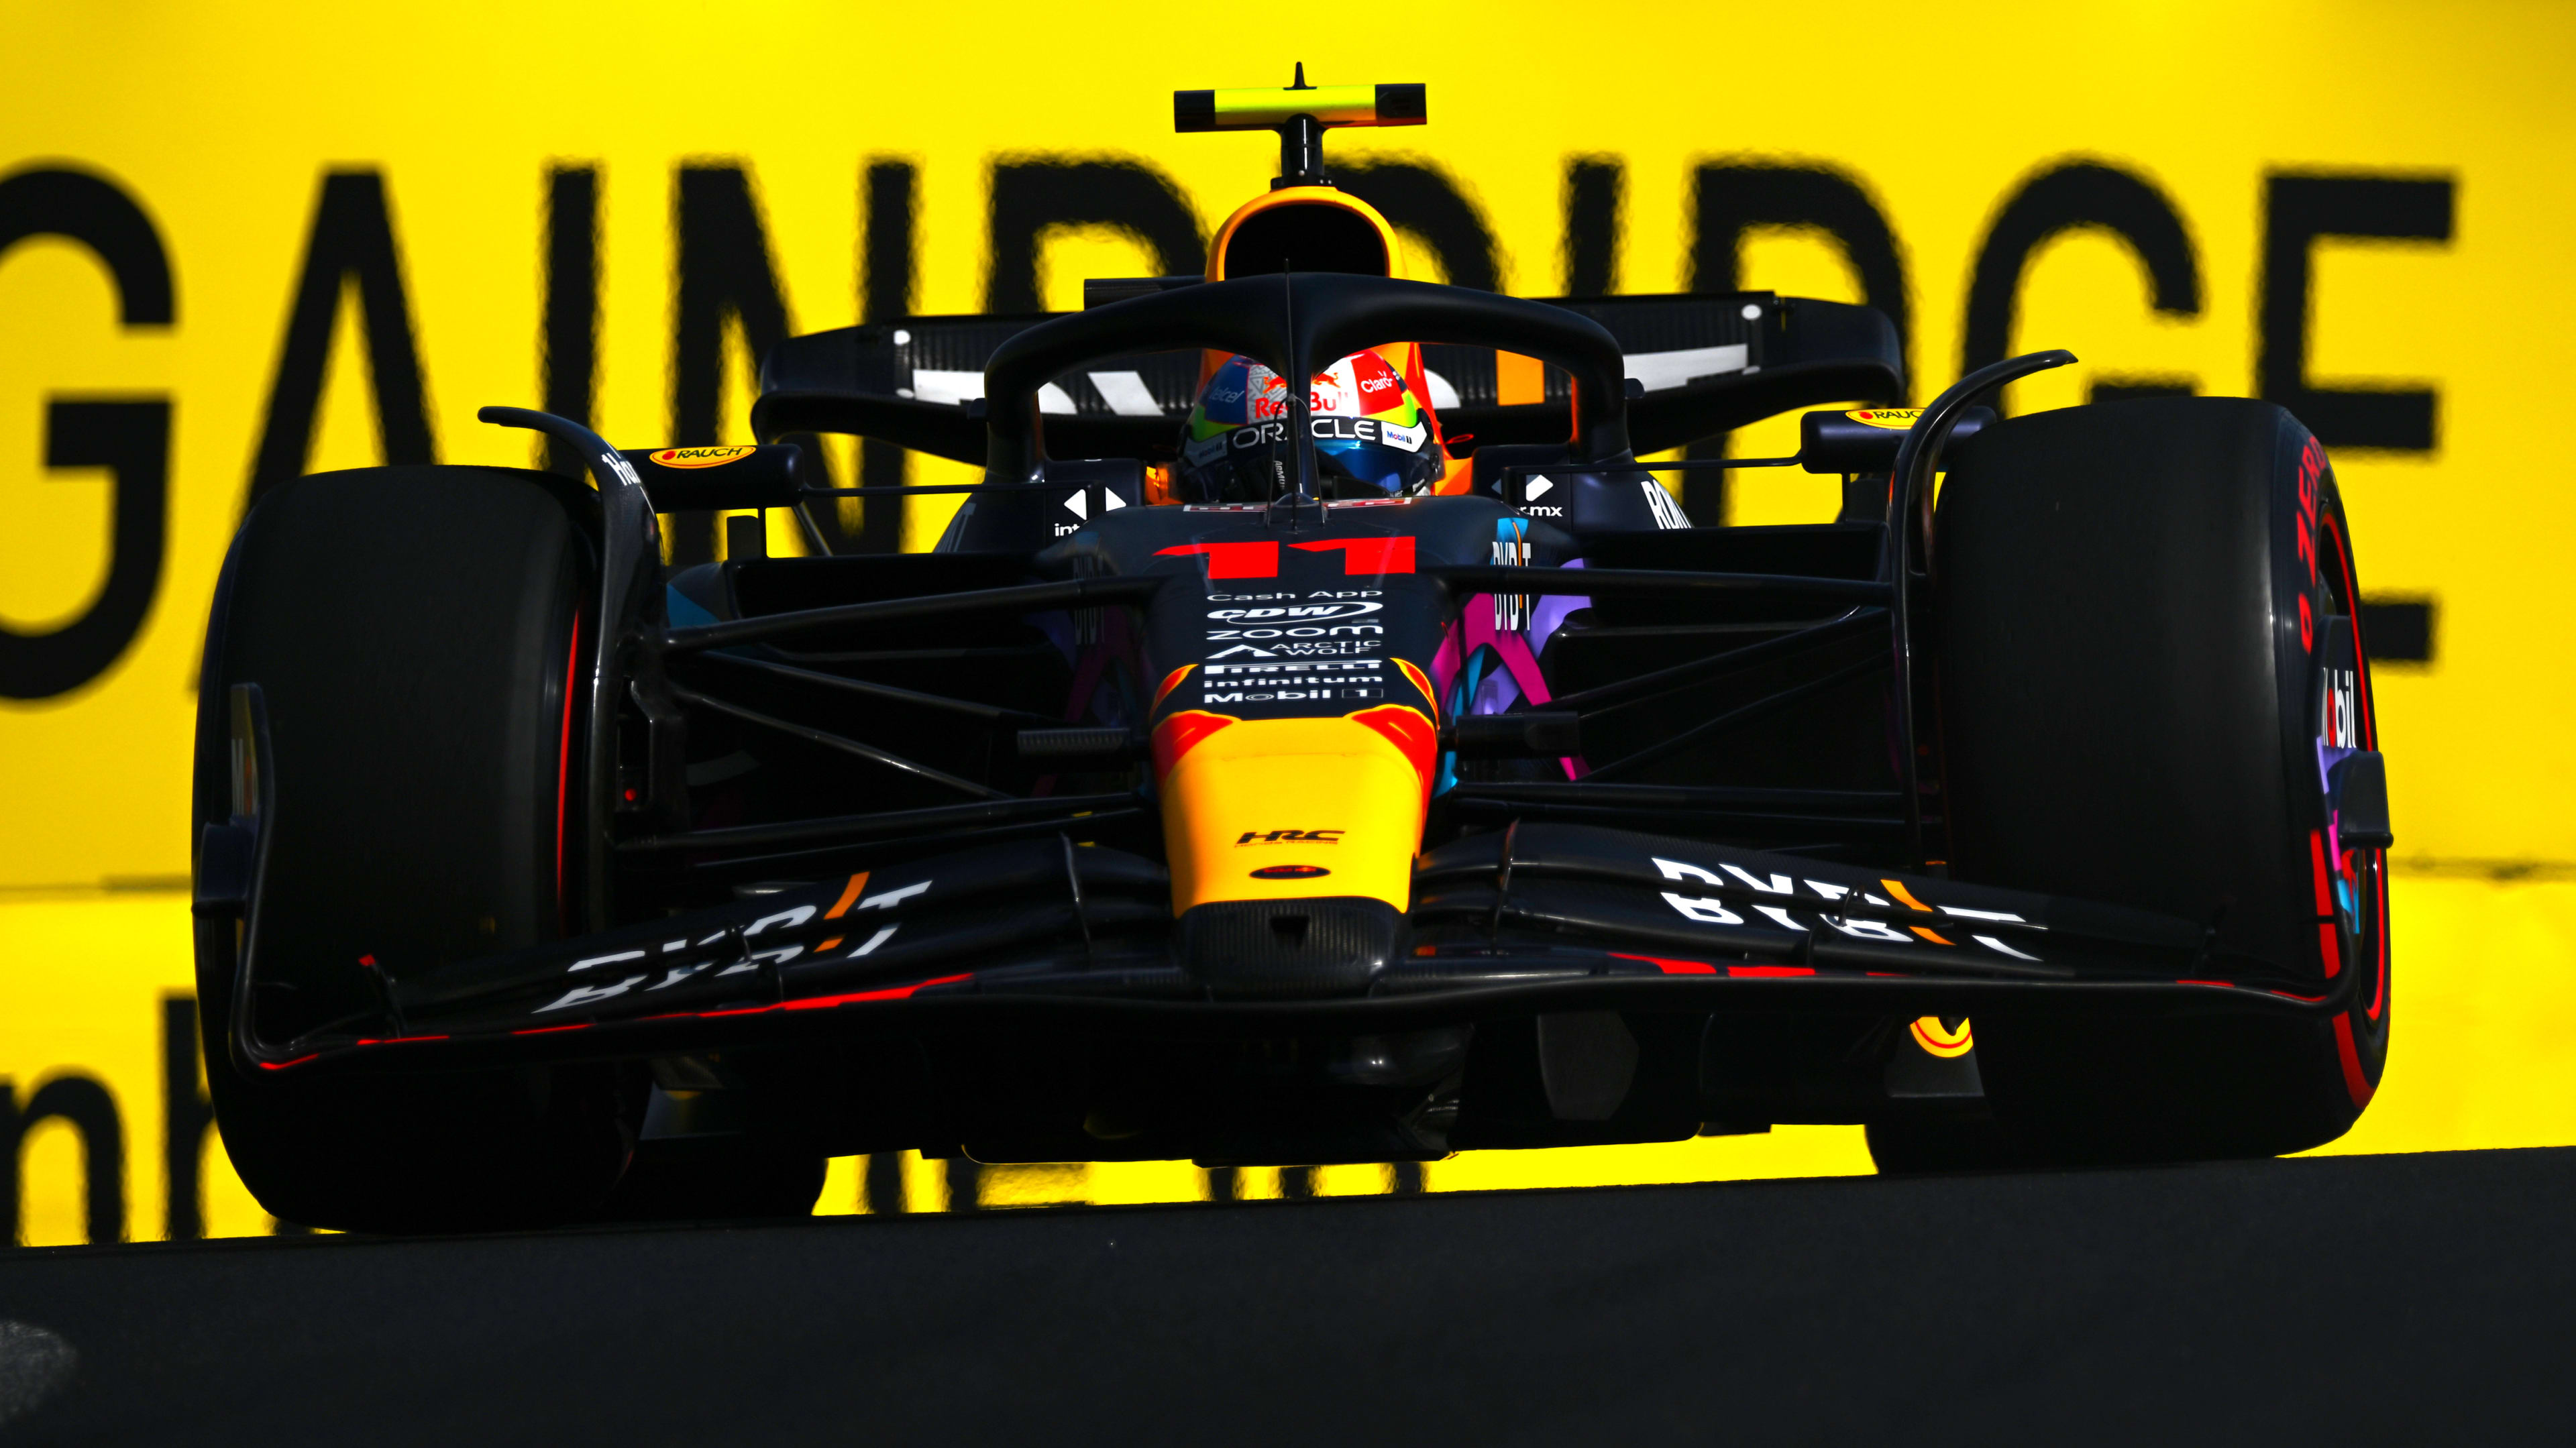 Monaco Grand Prix: Will Red Bull's winning F1 streak come to an end and why  McLaren could cause a shock